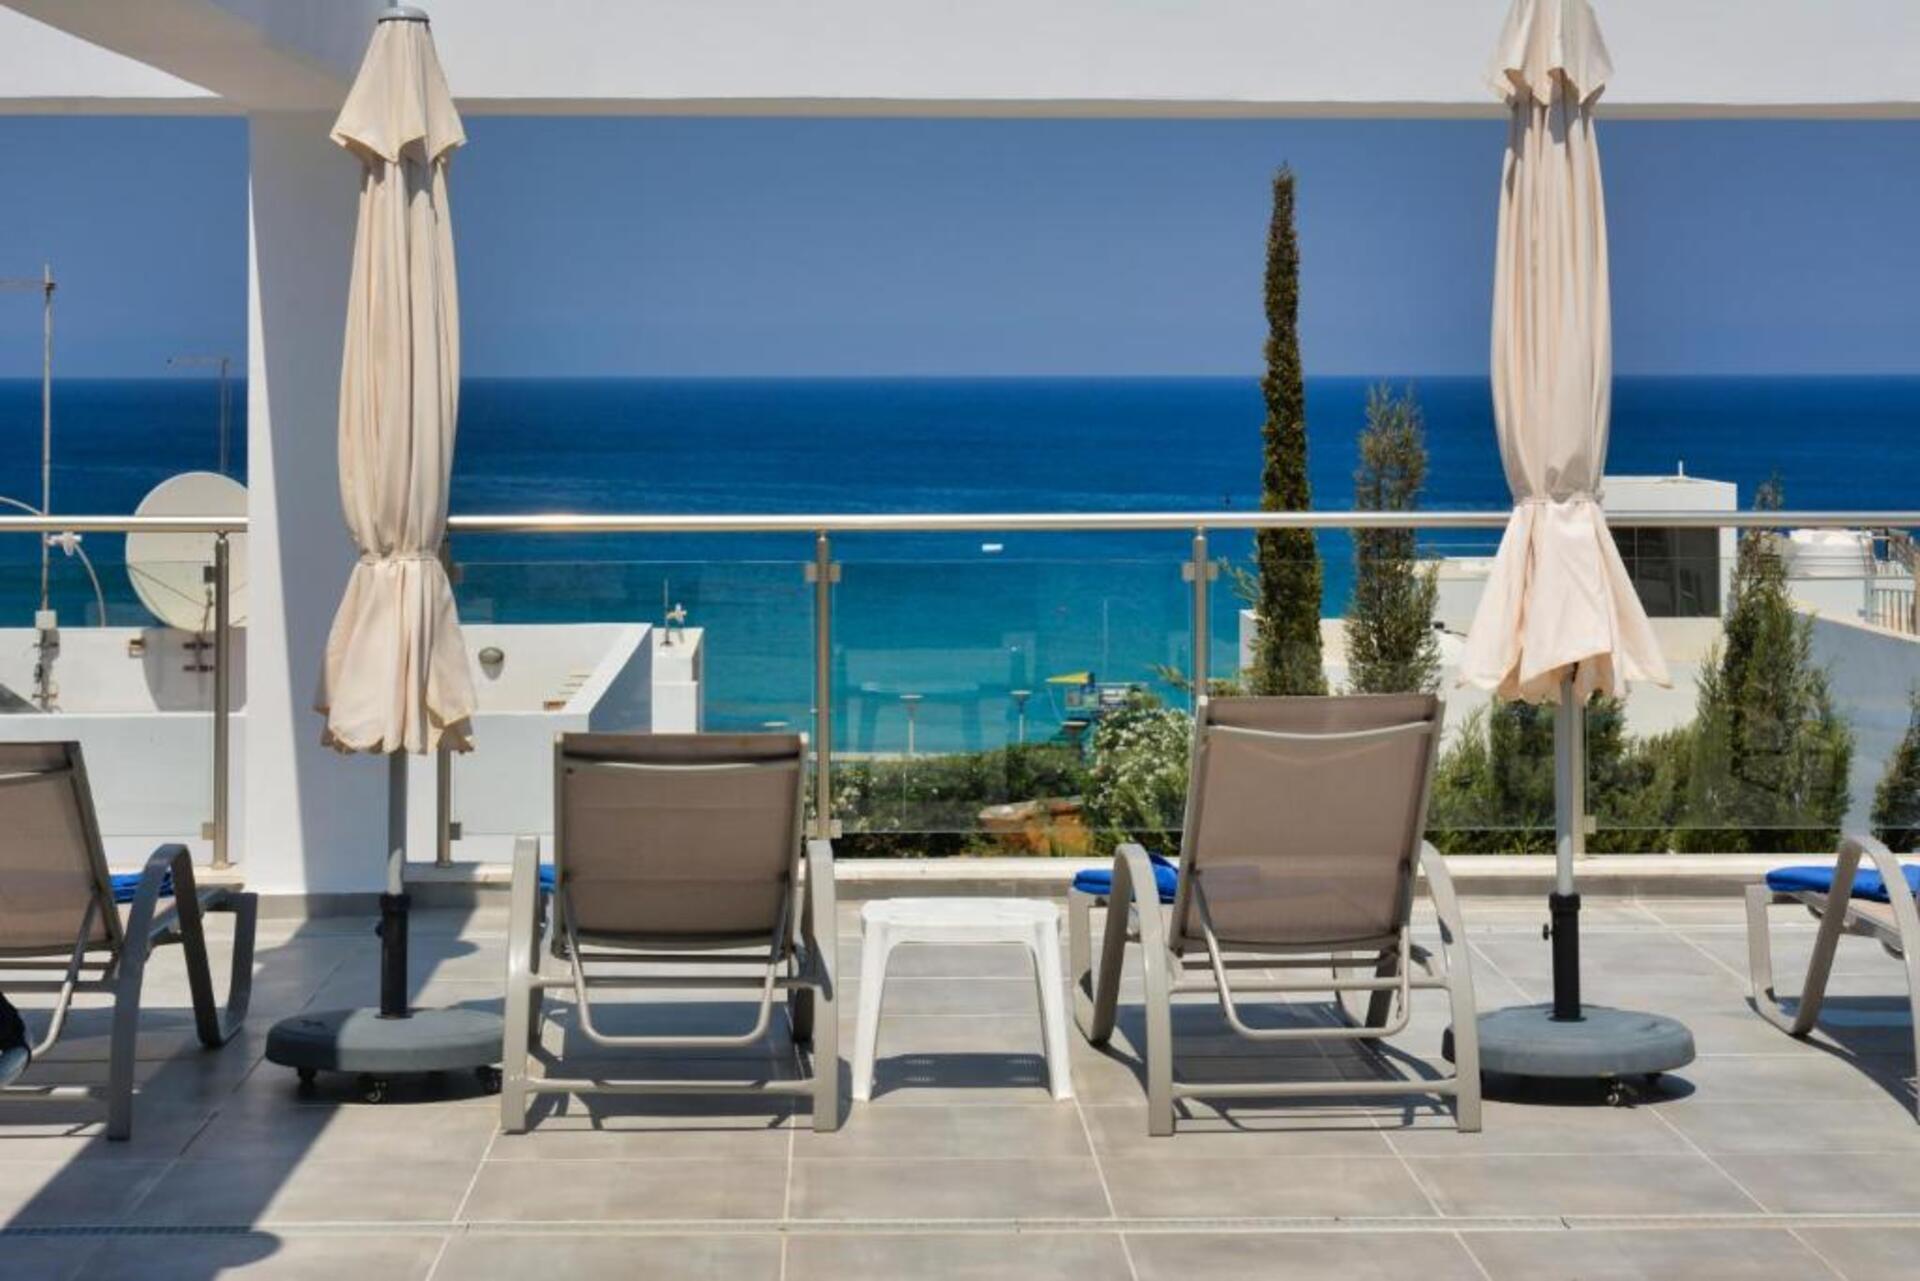 Property Image 1 - Terrific Apartment with Sea Views from Balcony in Protaras, Protaras Apartment 1682